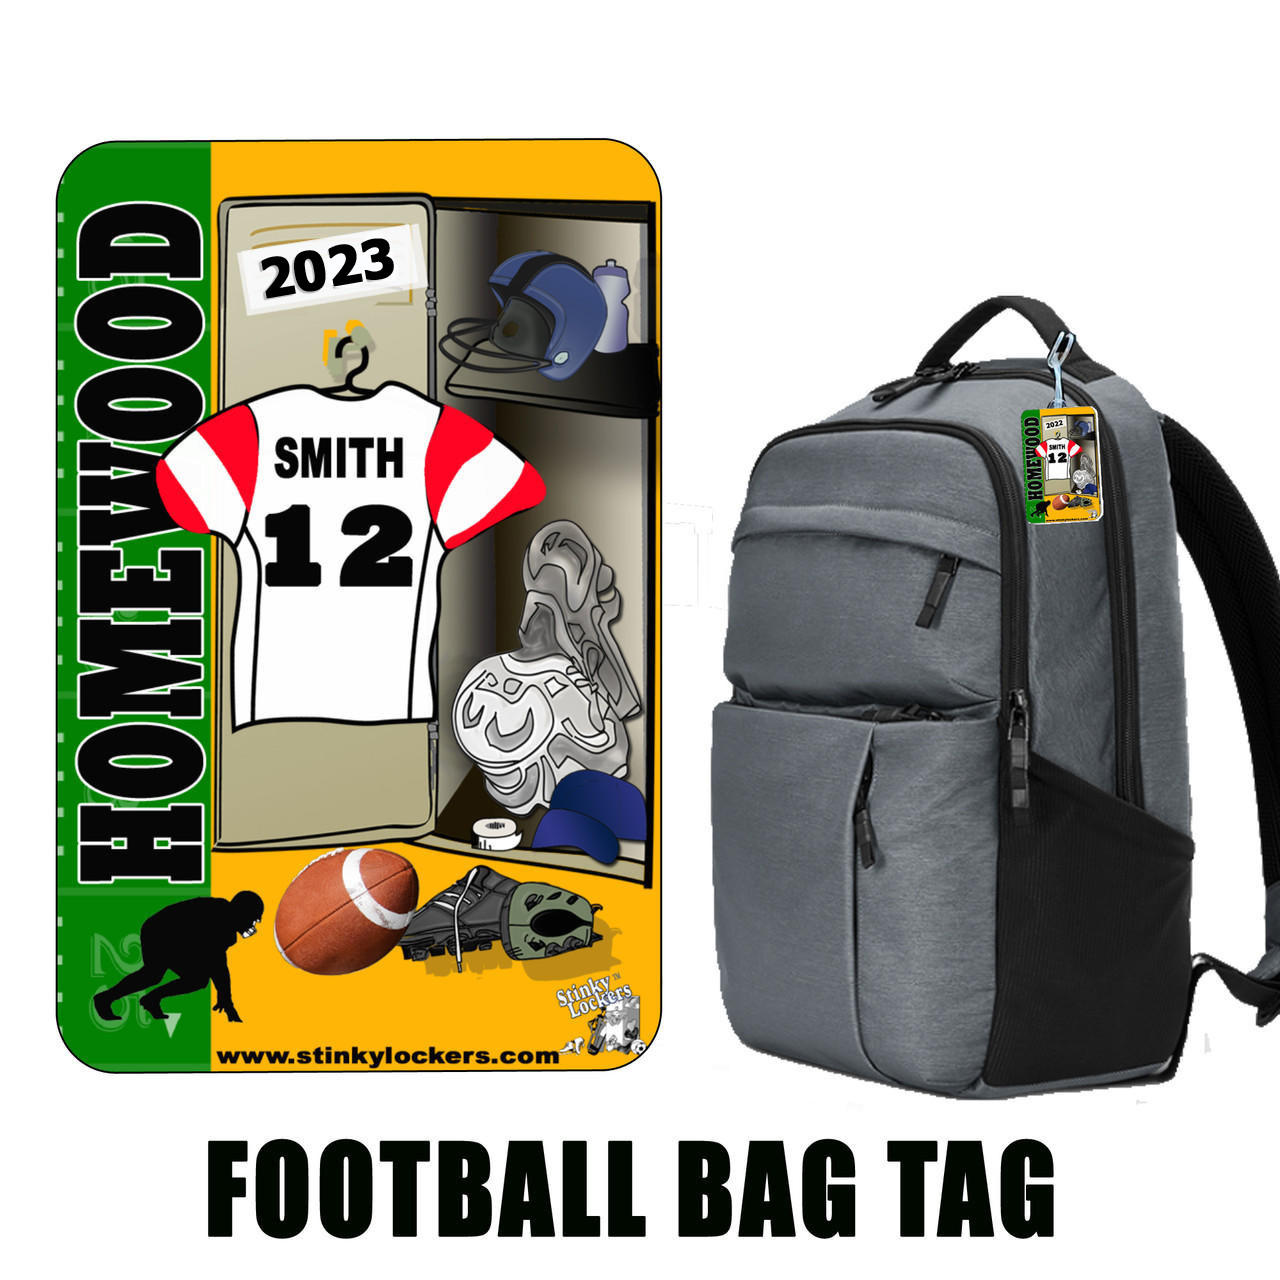 Personalized Football Luggage Tag with Loop Questions & Answers